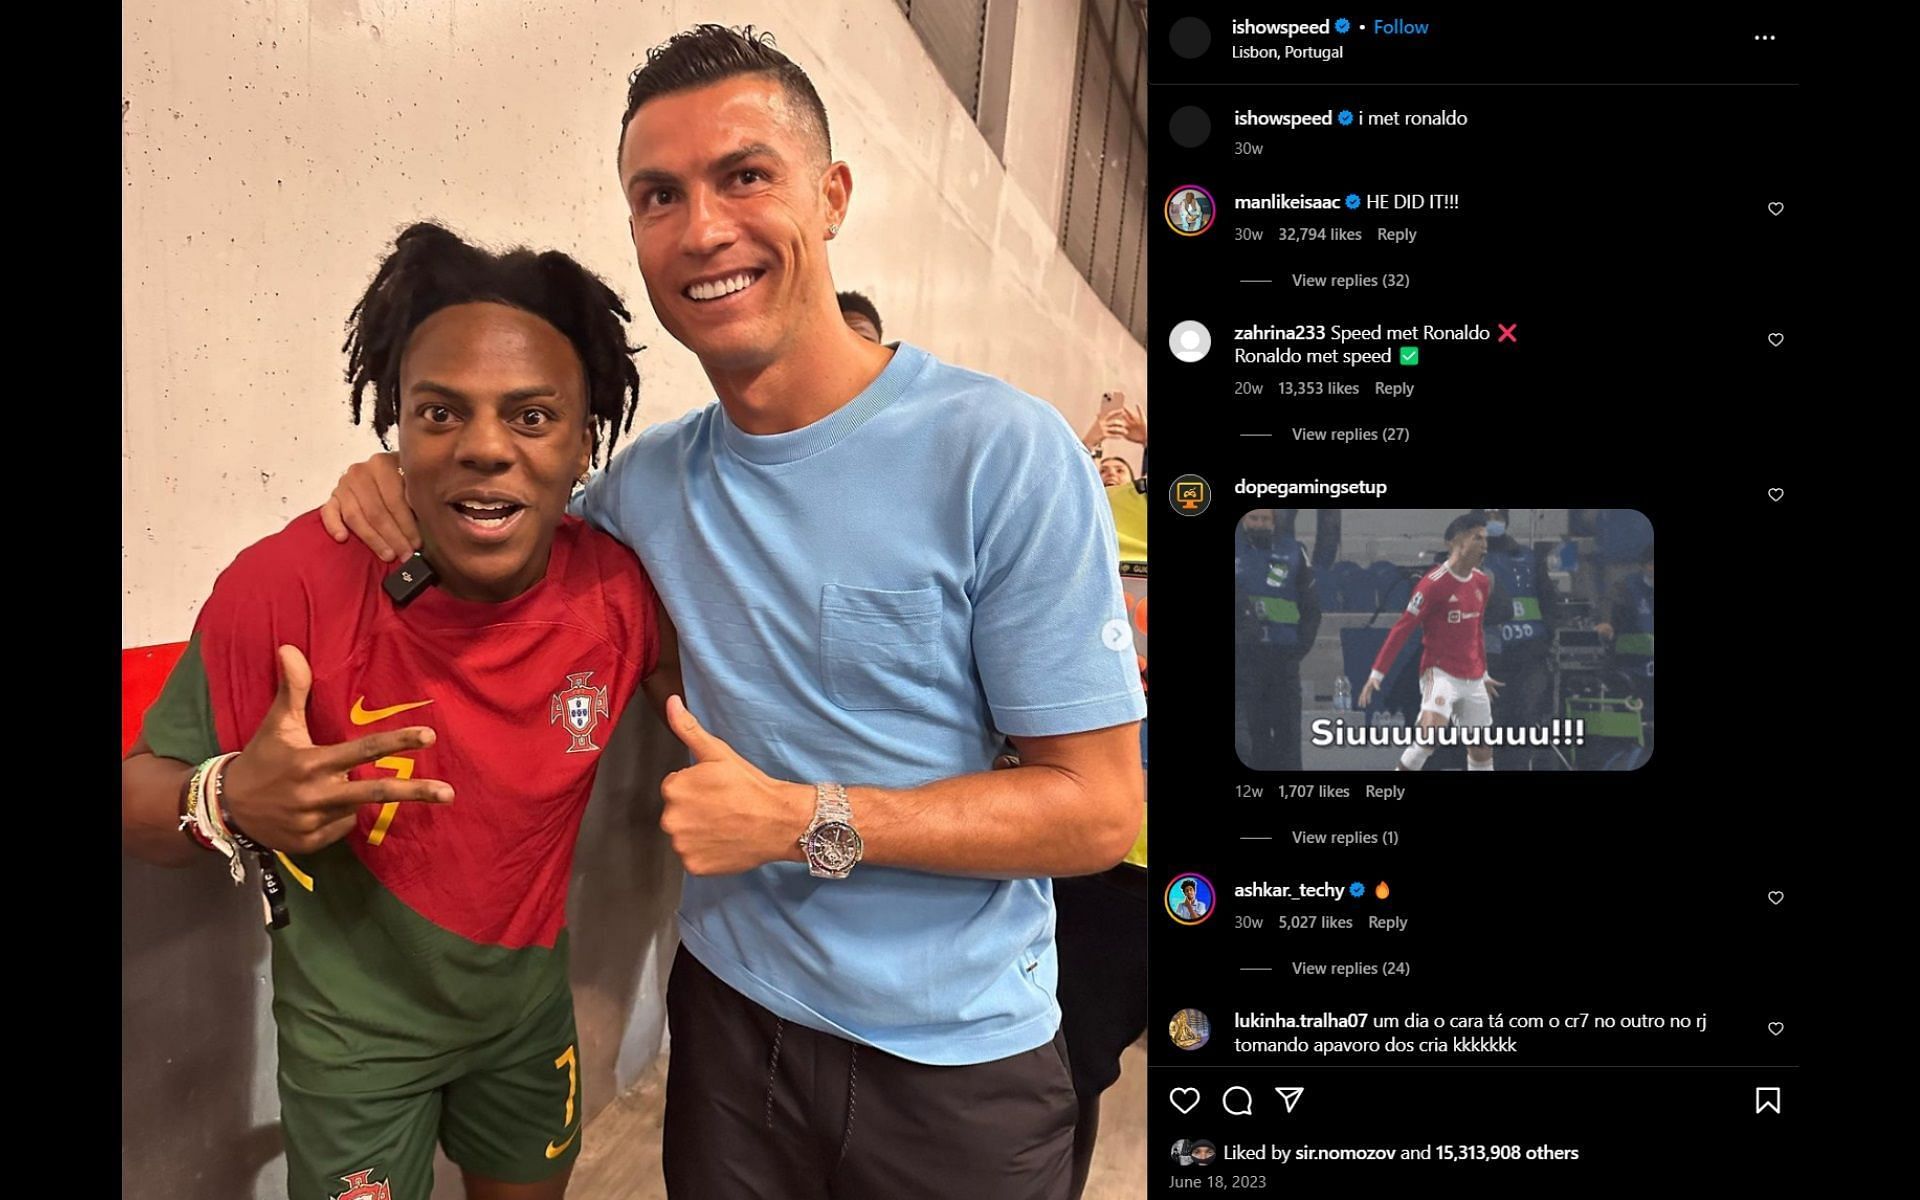 The YouTube star&#039;s viral picture with Cristiano Ronaldo on Instagram (Image via Instagram)